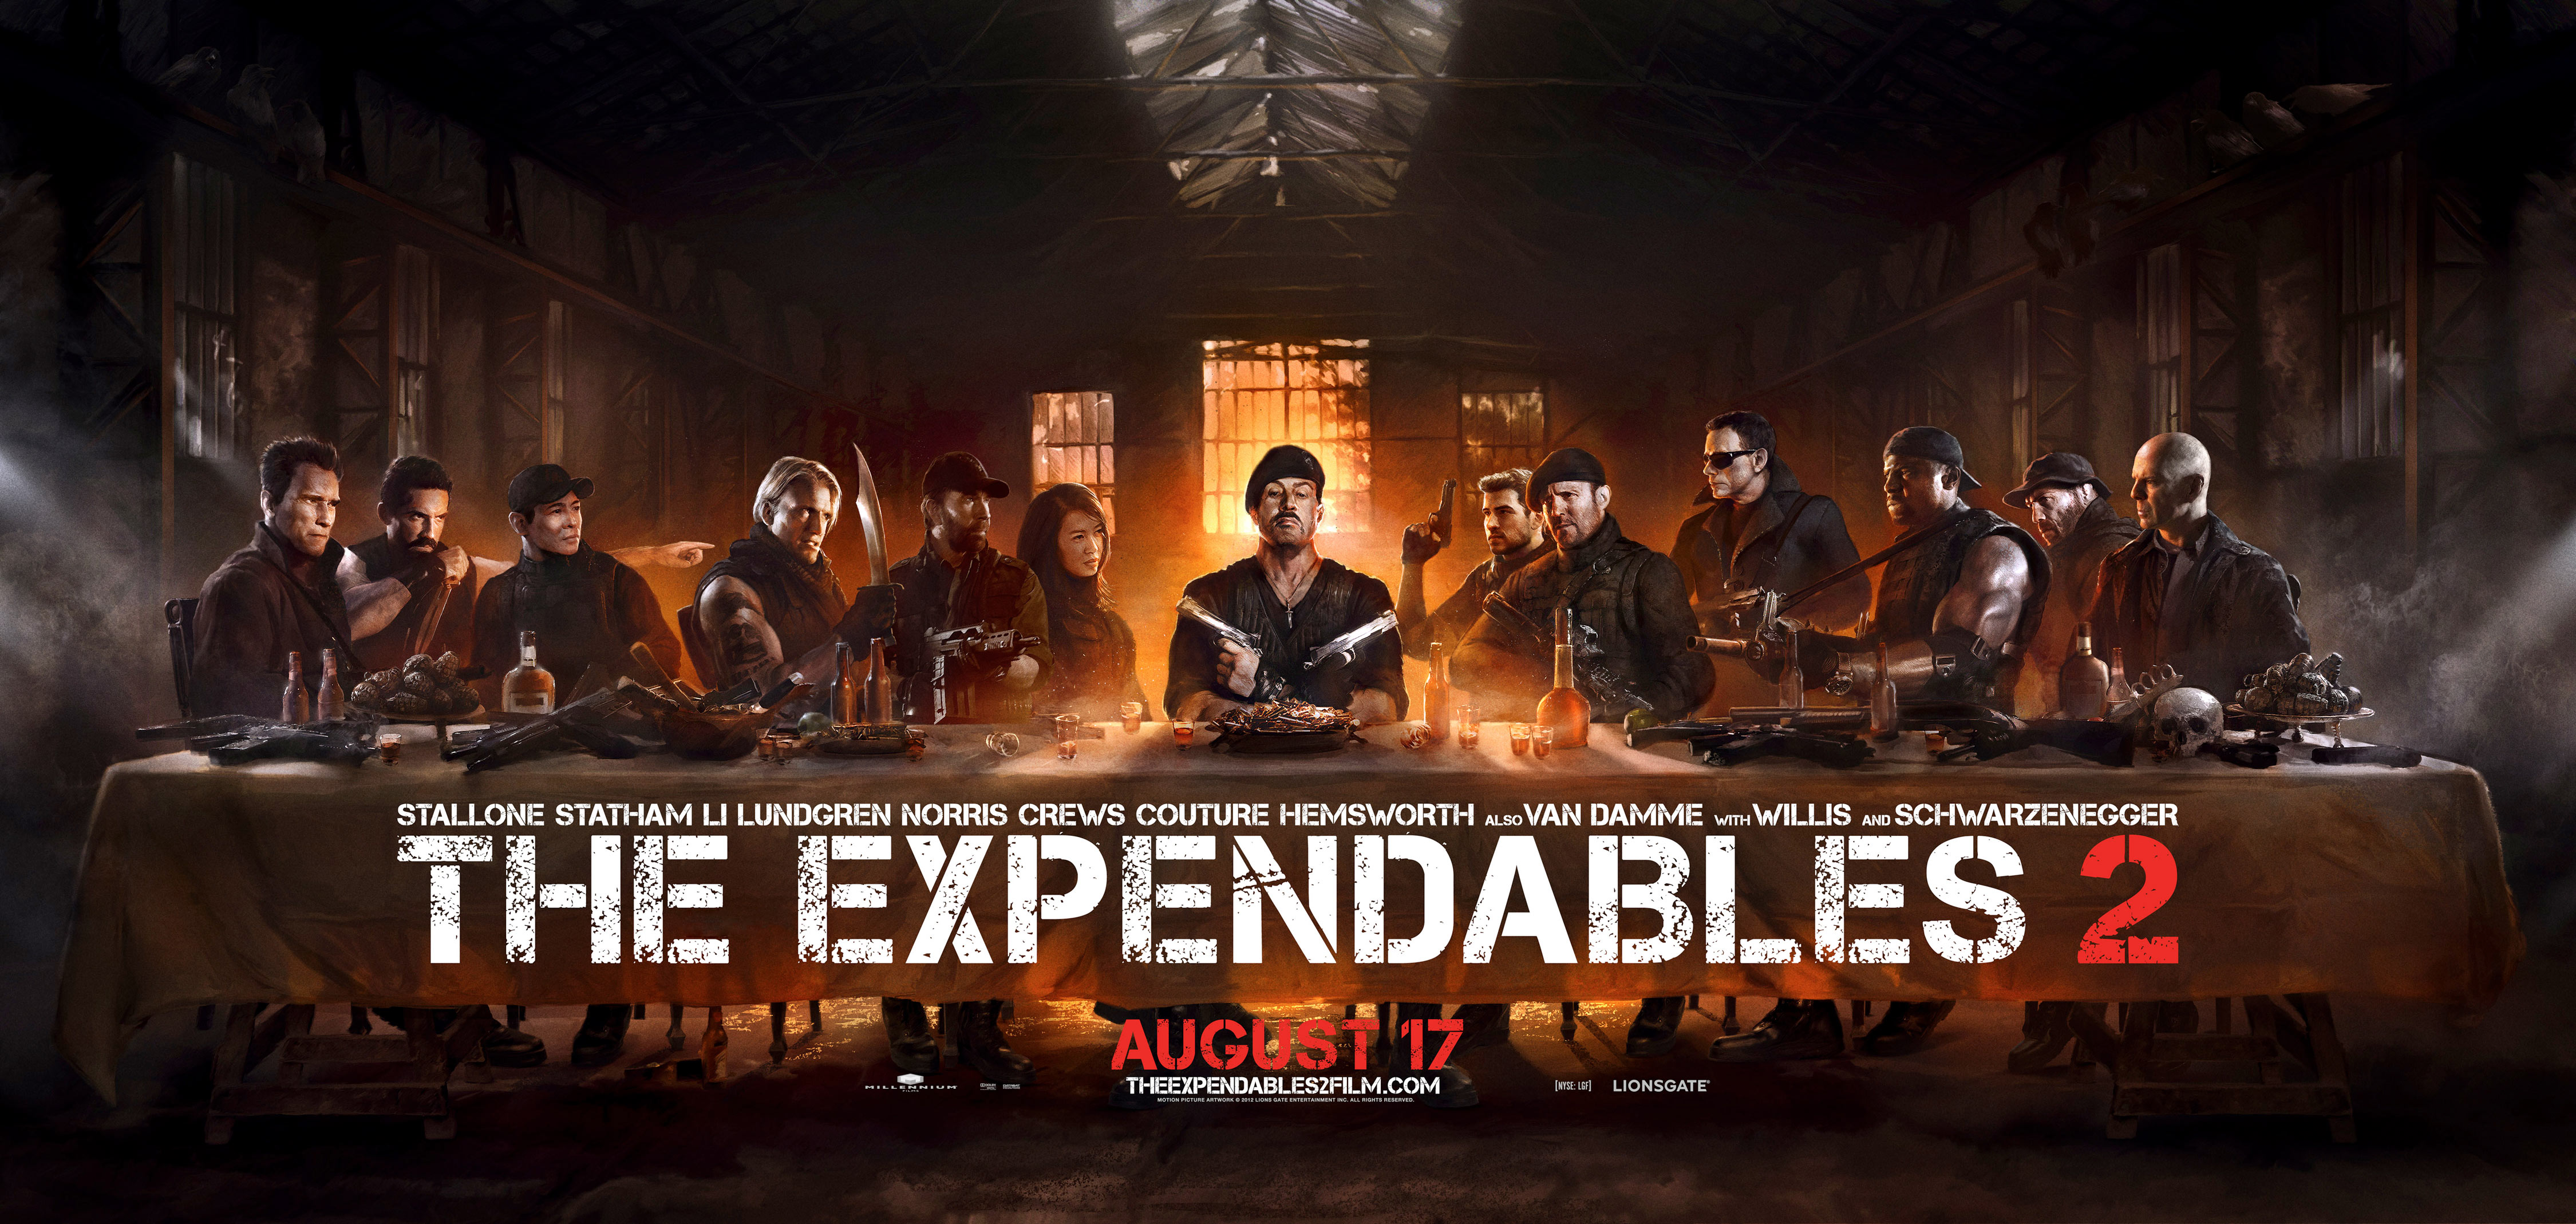 movie, the expendables 2, arnold schwarzenegger, barney ross, billy (the expendables), booker (the expendables), bruce willis, chuck norris, church (the expendables), dolph lundgren, gunnar jensen, hale caesar, jason statham, jean claude van damme, jet li, lee christmas, liam hemsworth, maggie (the expendables), nan yu, randy couture, sylvester stallone, terry crews, toll road, trench (the expendables), vilain (the expendables), yin yang (the expendables), the expendables wallpaper for mobile